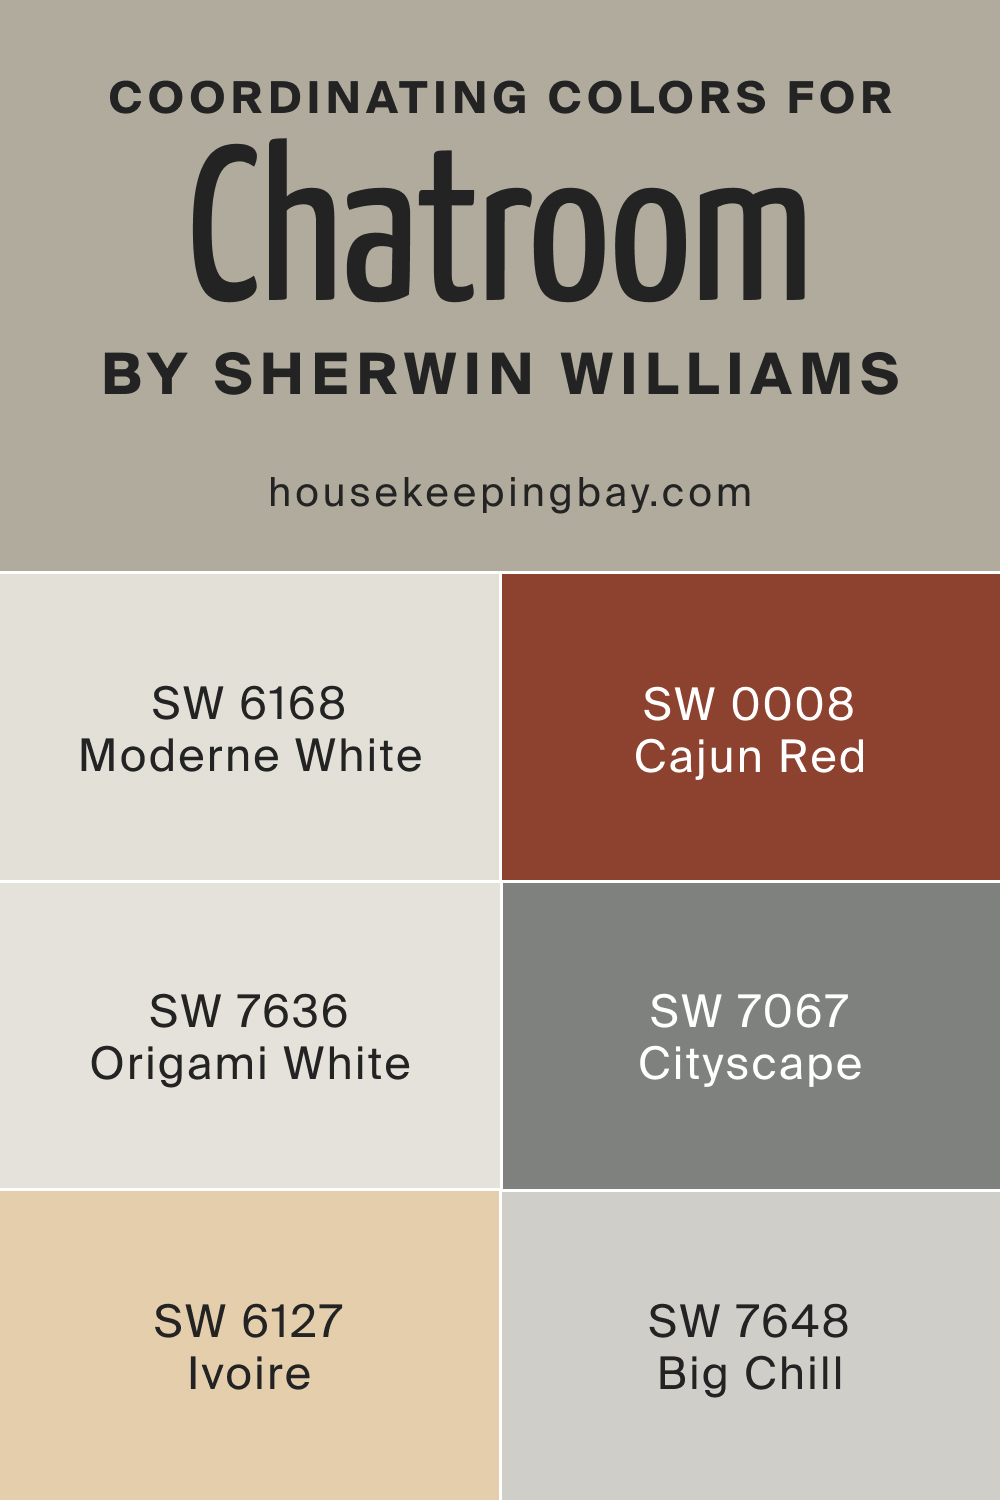 Coordinating Colors for SW 6171 Chatroom by Sherwin Williams